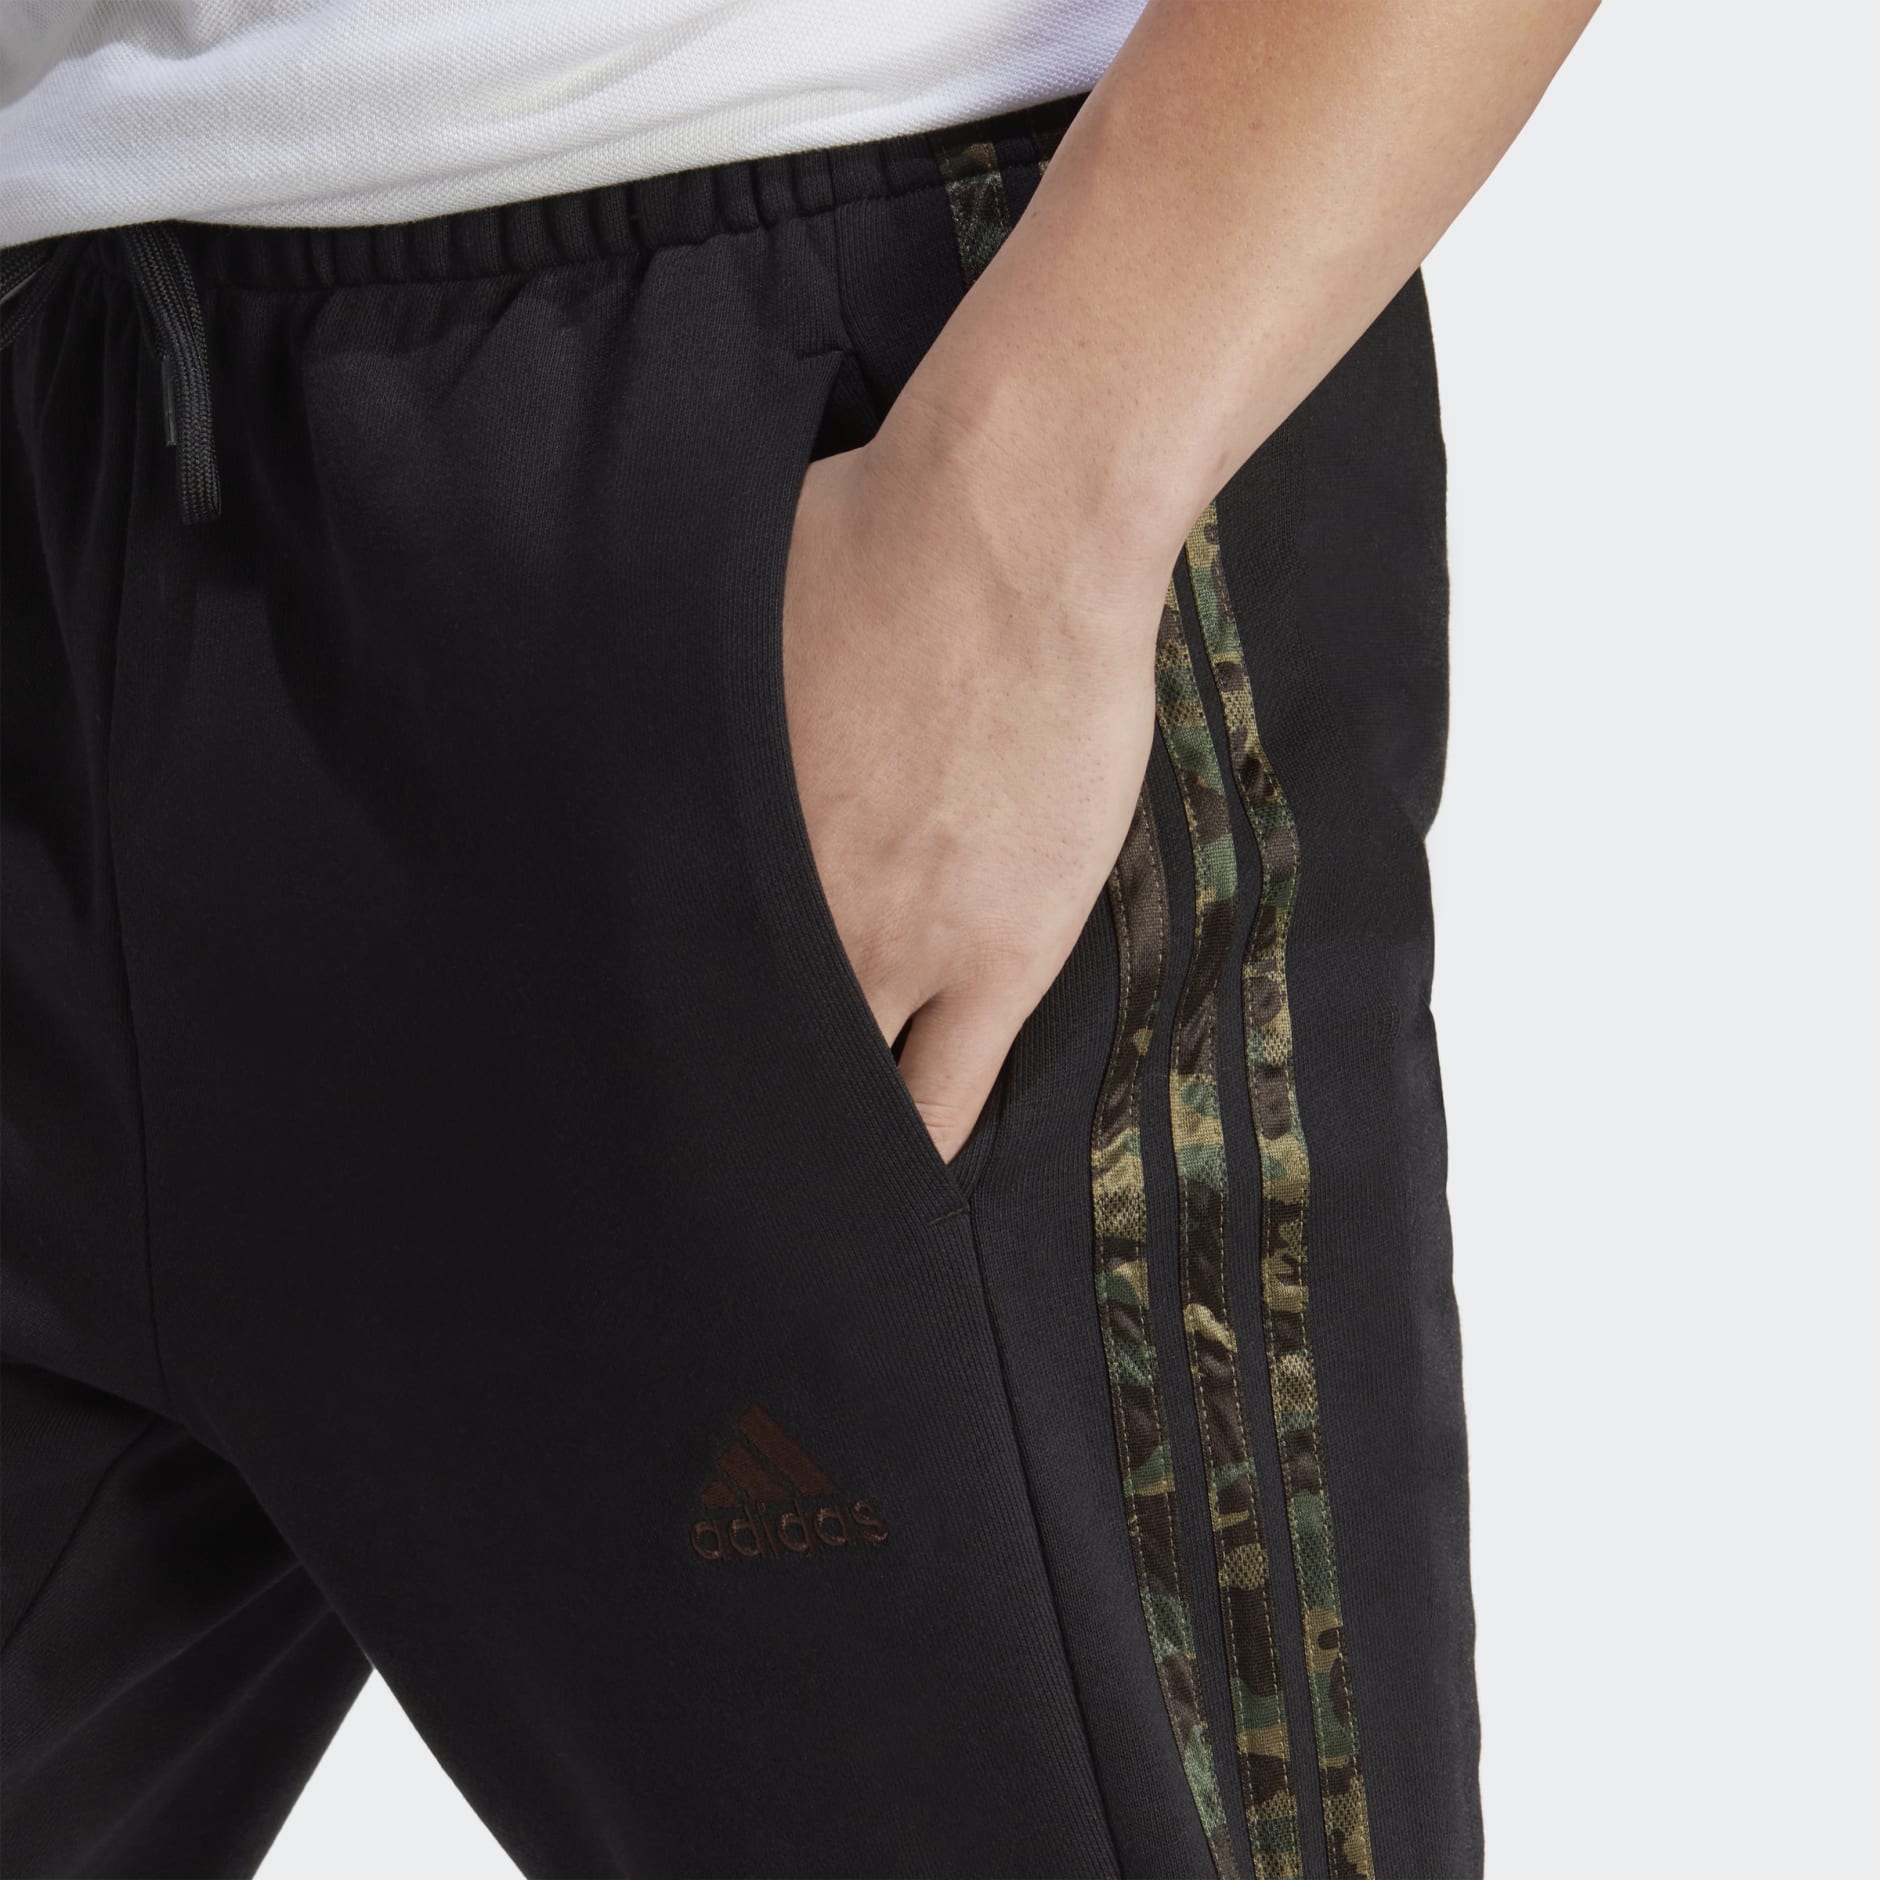 GH Black Essentials Cuff Tapered adidas adidas Elastic 3-Stripes - Terry French Pants |